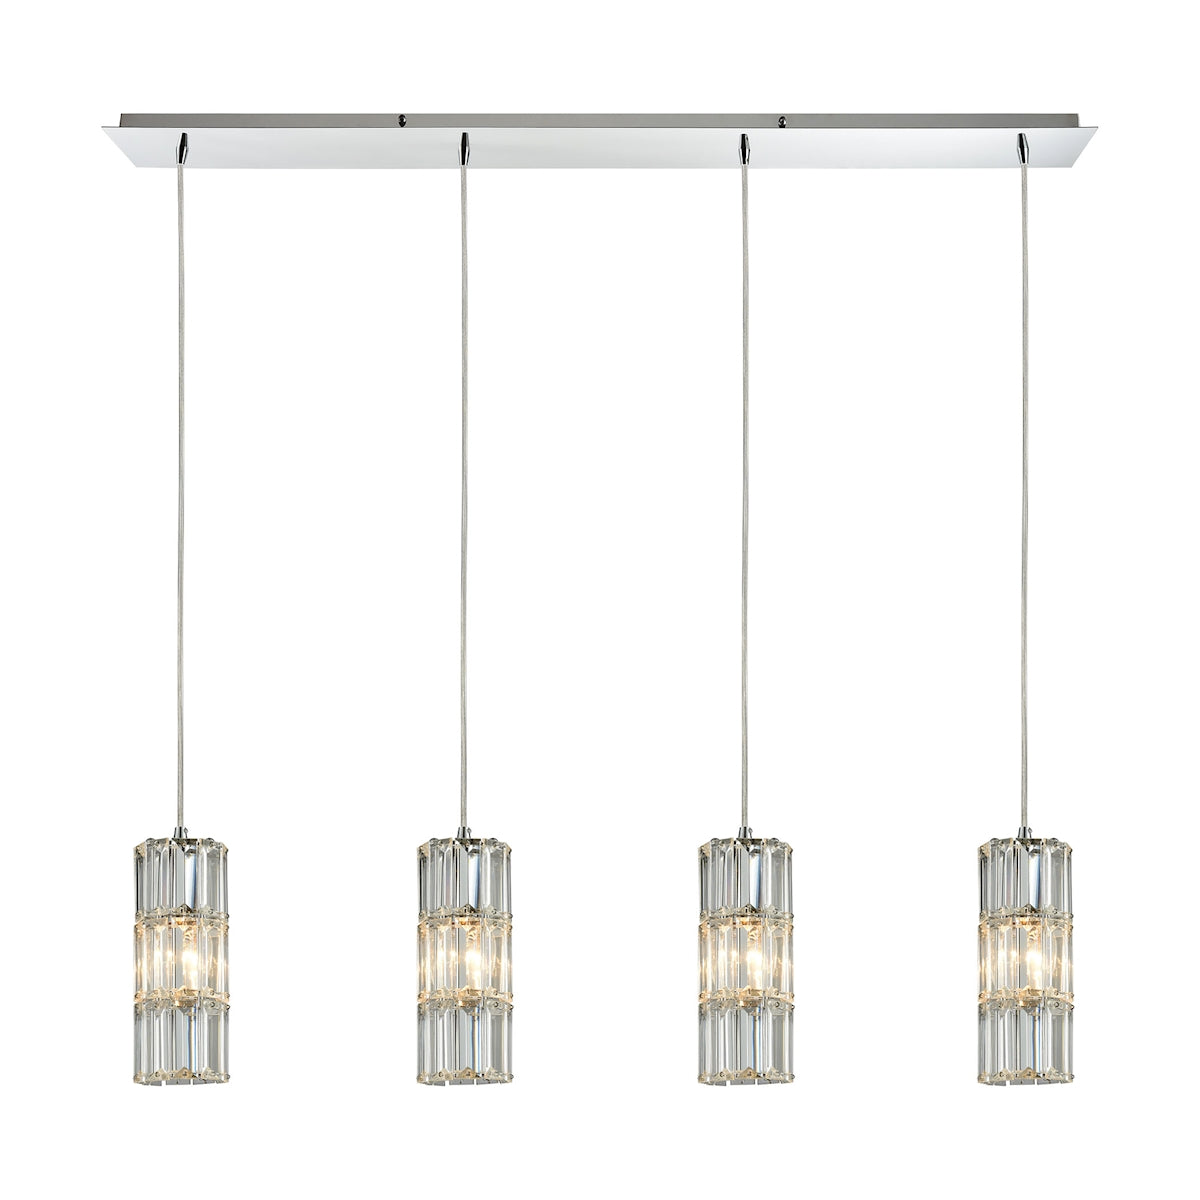 ELK Lighting 31486/4LP Cynthia 4-Light Linear Pendant Fixture in Polished Chrome with Crystal